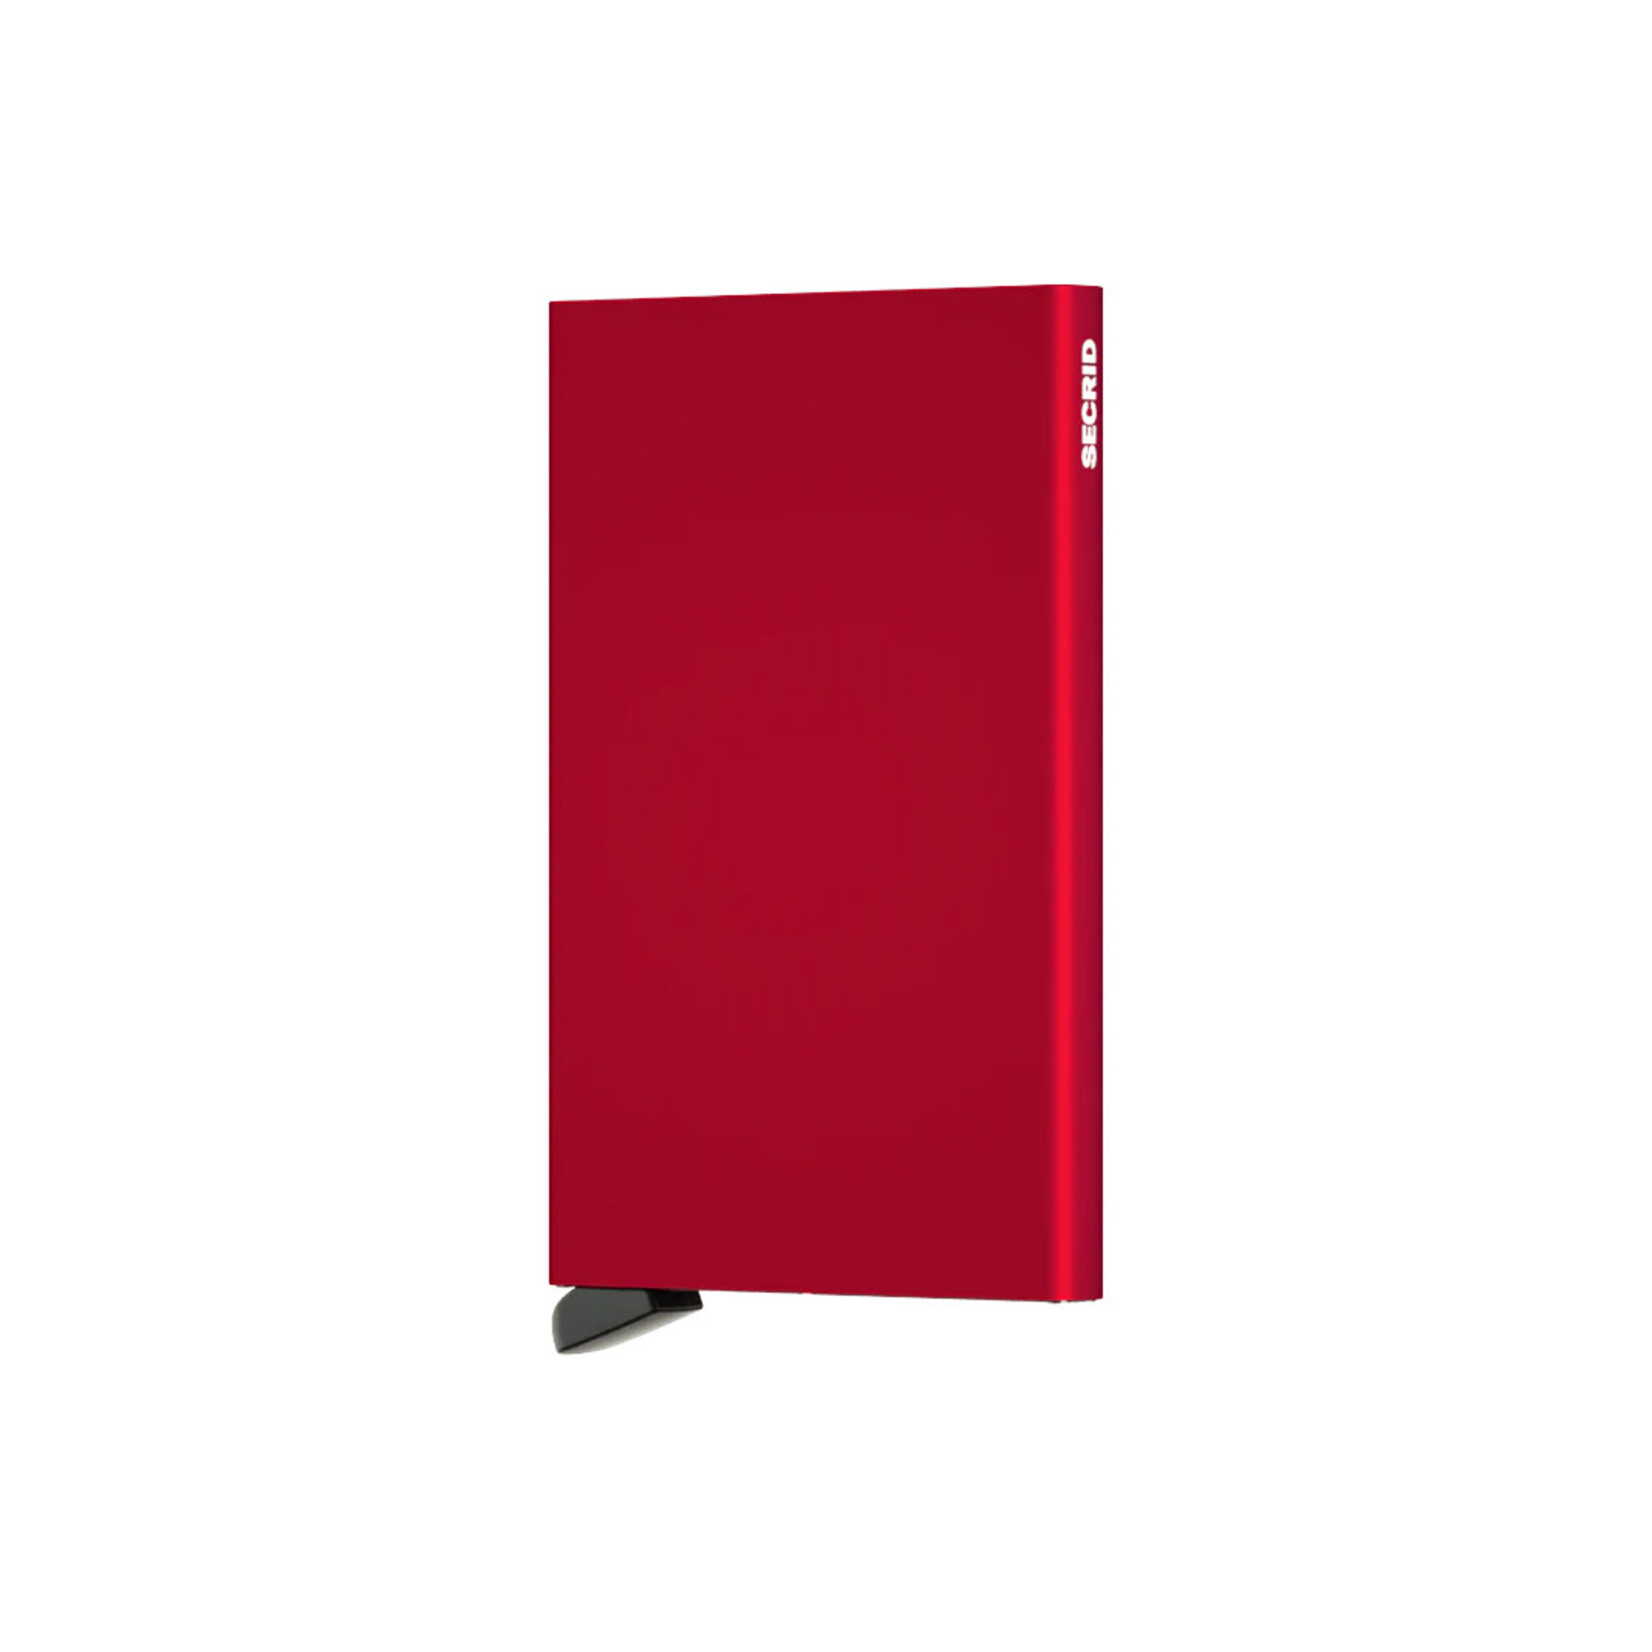 Secrid Cardprotector, Red